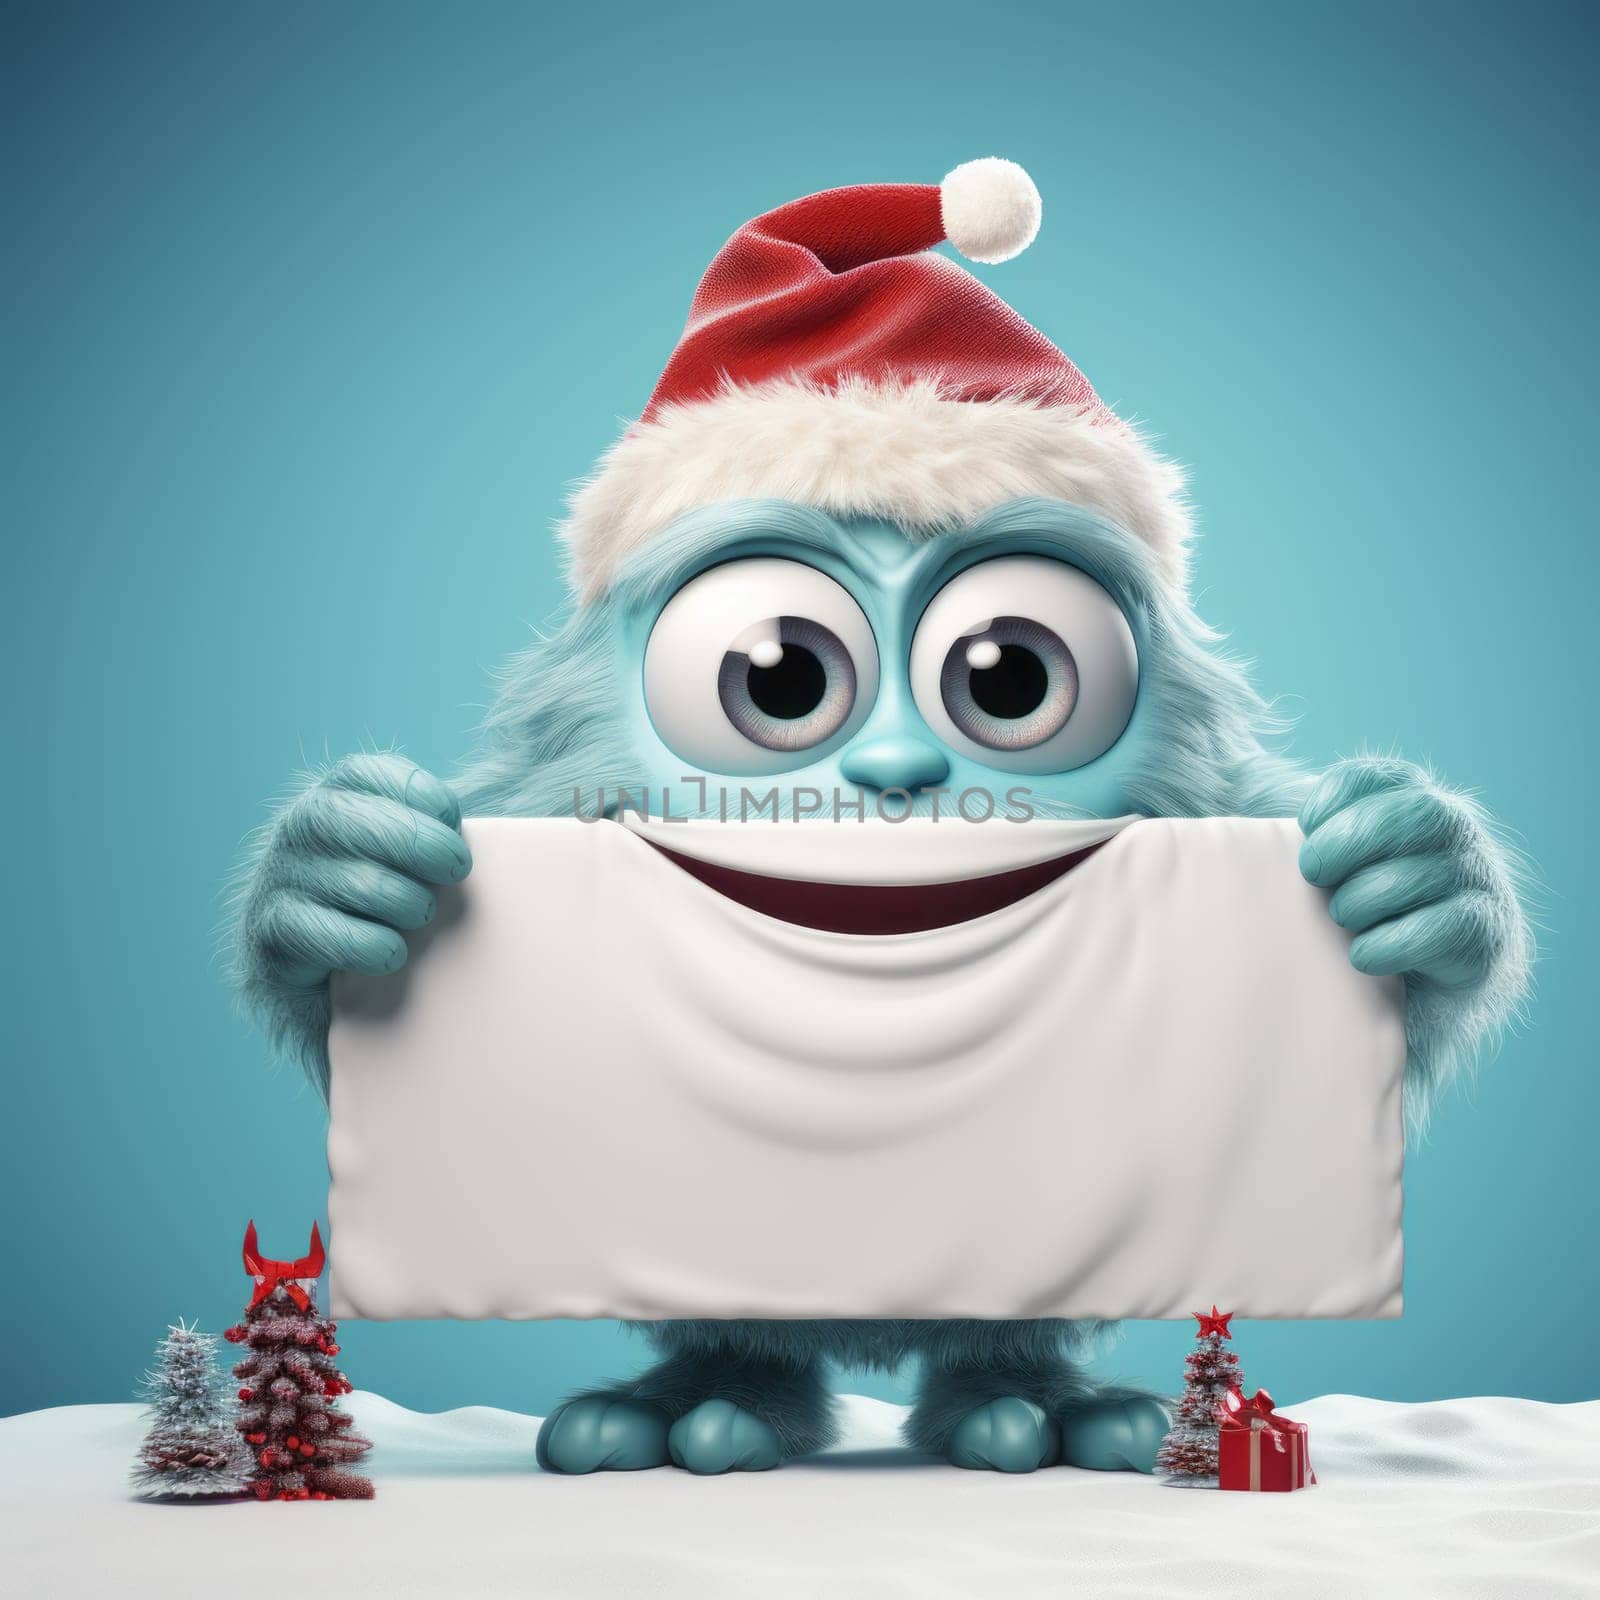 A joyful blue monster wearing a Santa hat, holding a blank white banner, with Christmas trees and a gift in a snowy scene. Mock up